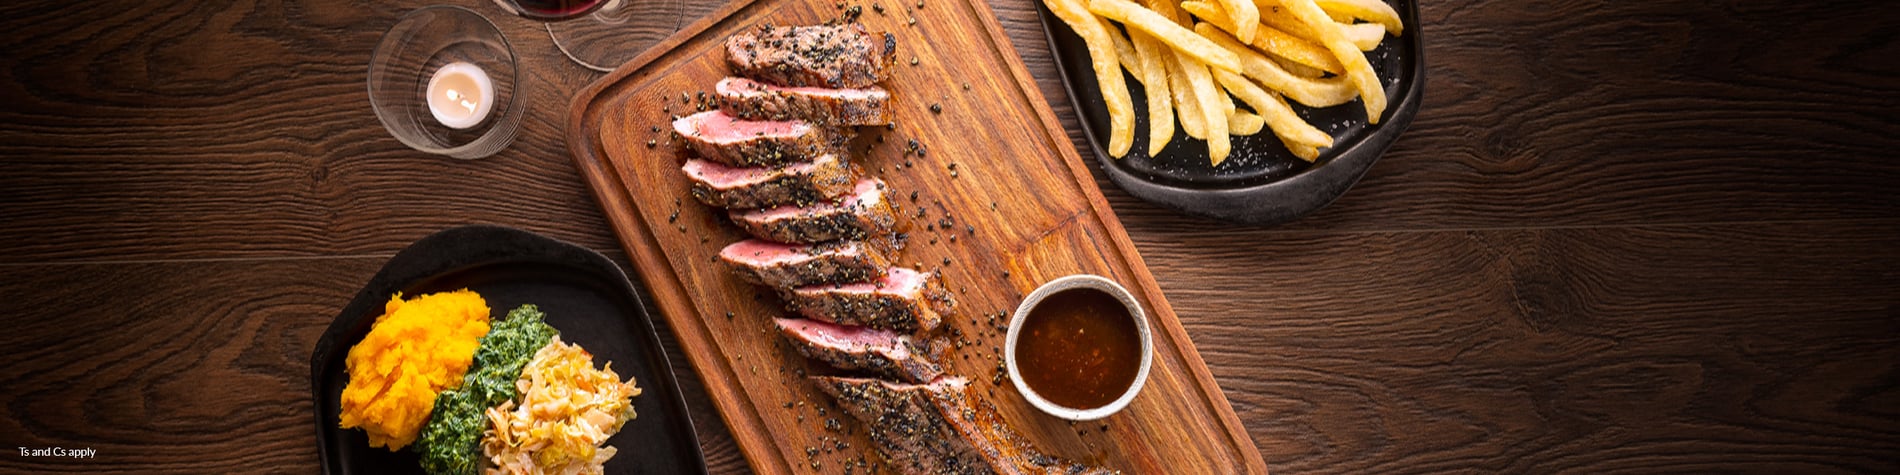 Sirloin Steak on a board, surrounded by sides and sauces.